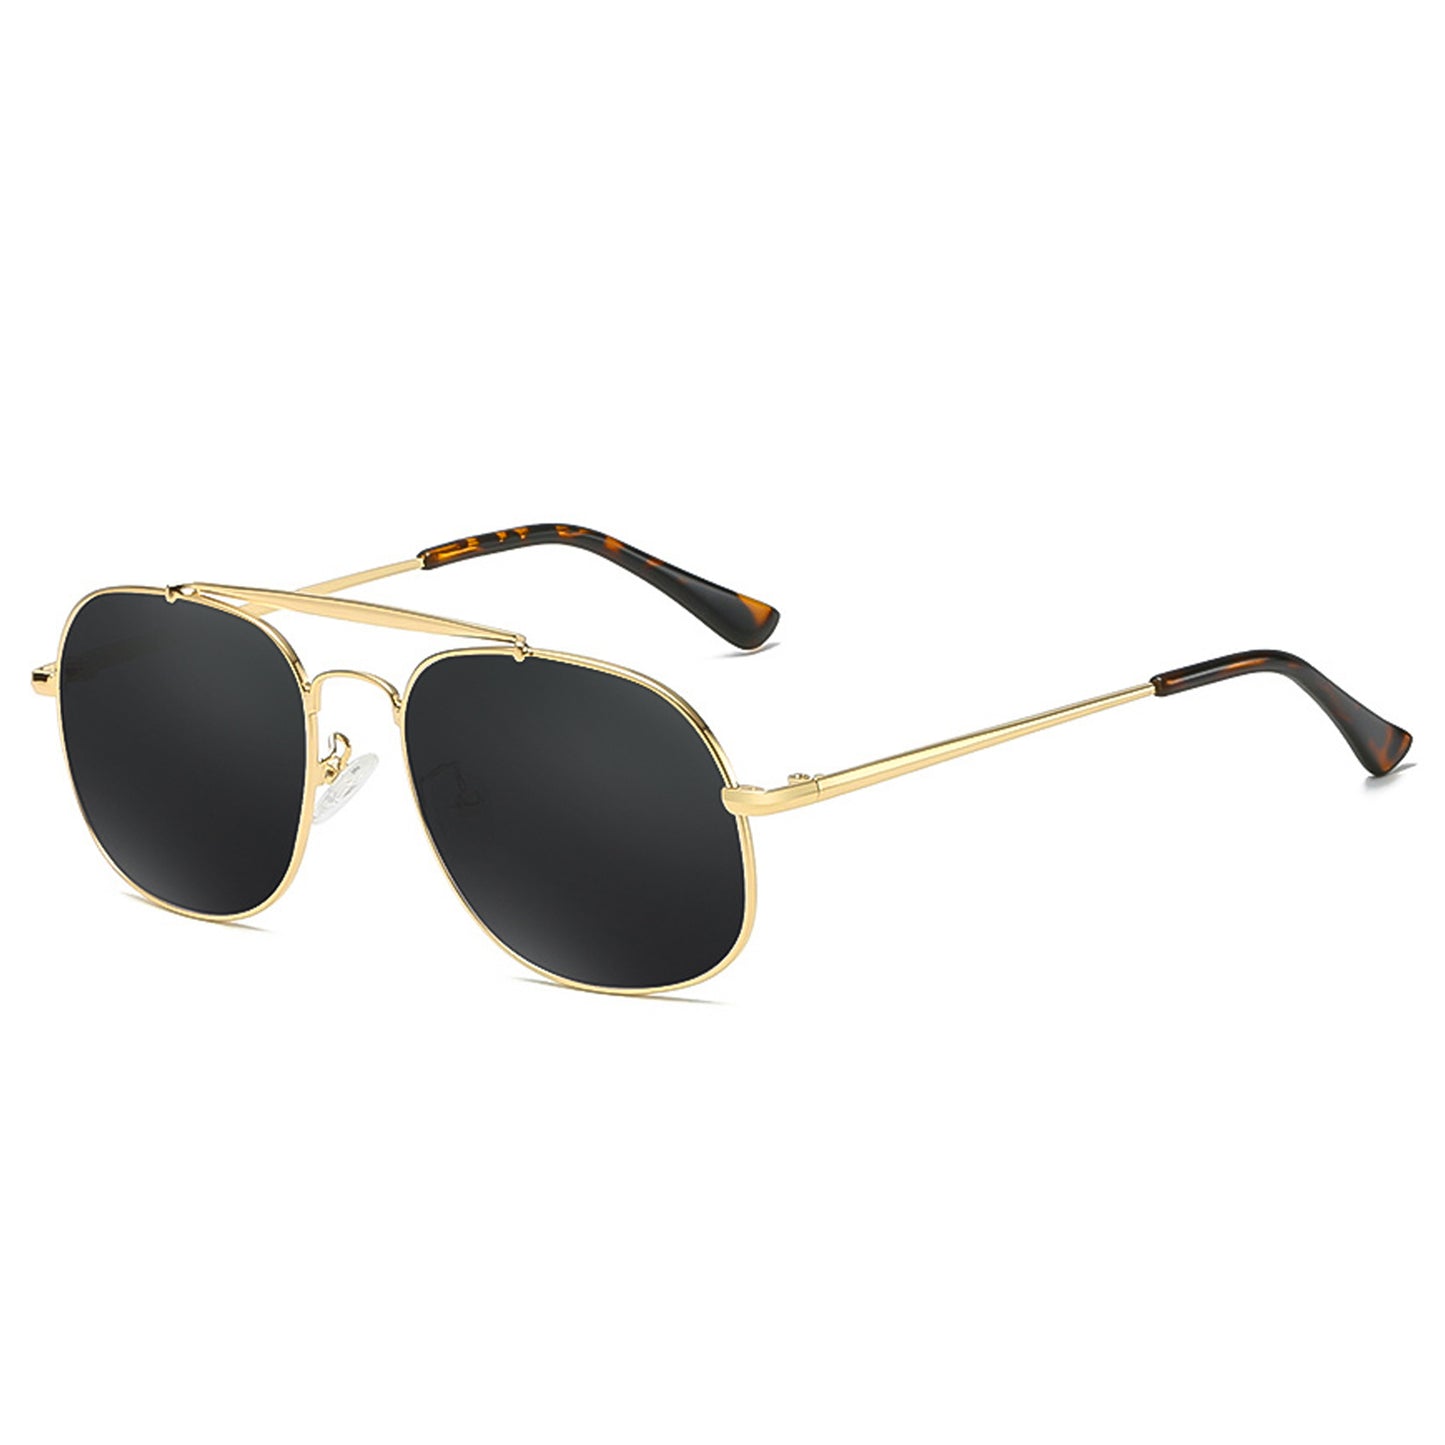 MS Gold And Black Unisex Sunglasses